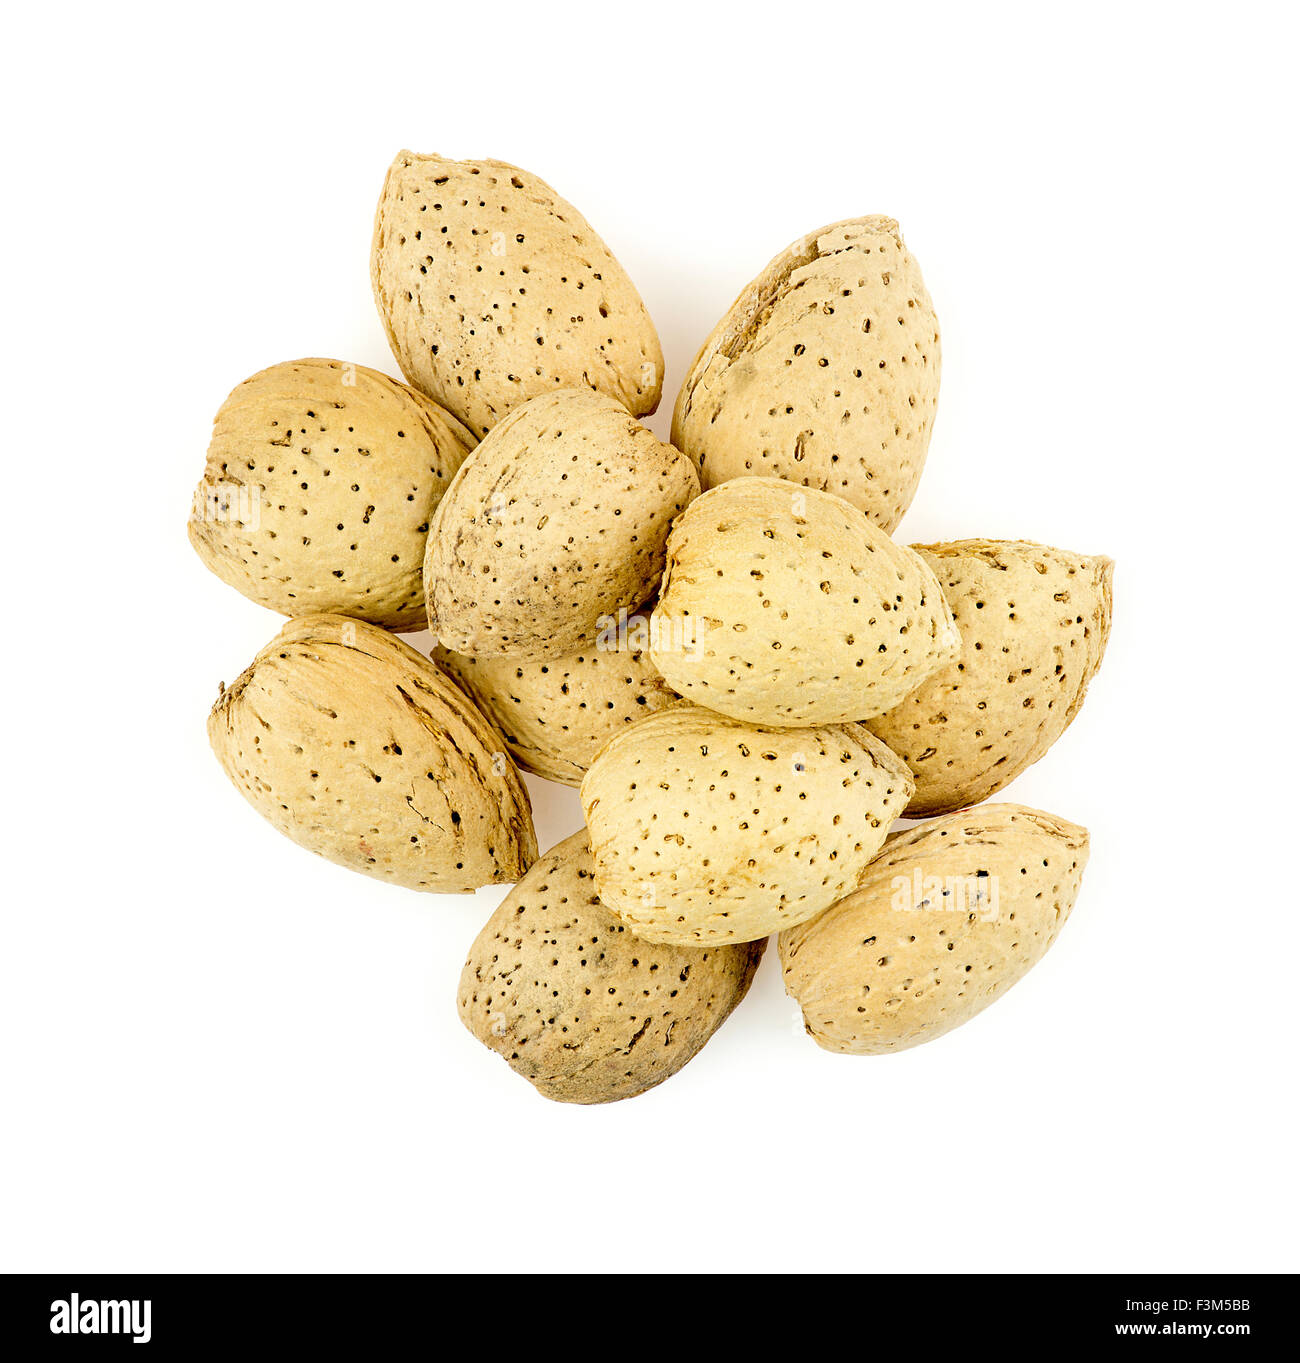 Pile of natural unshelled almonds on white Stock Photo